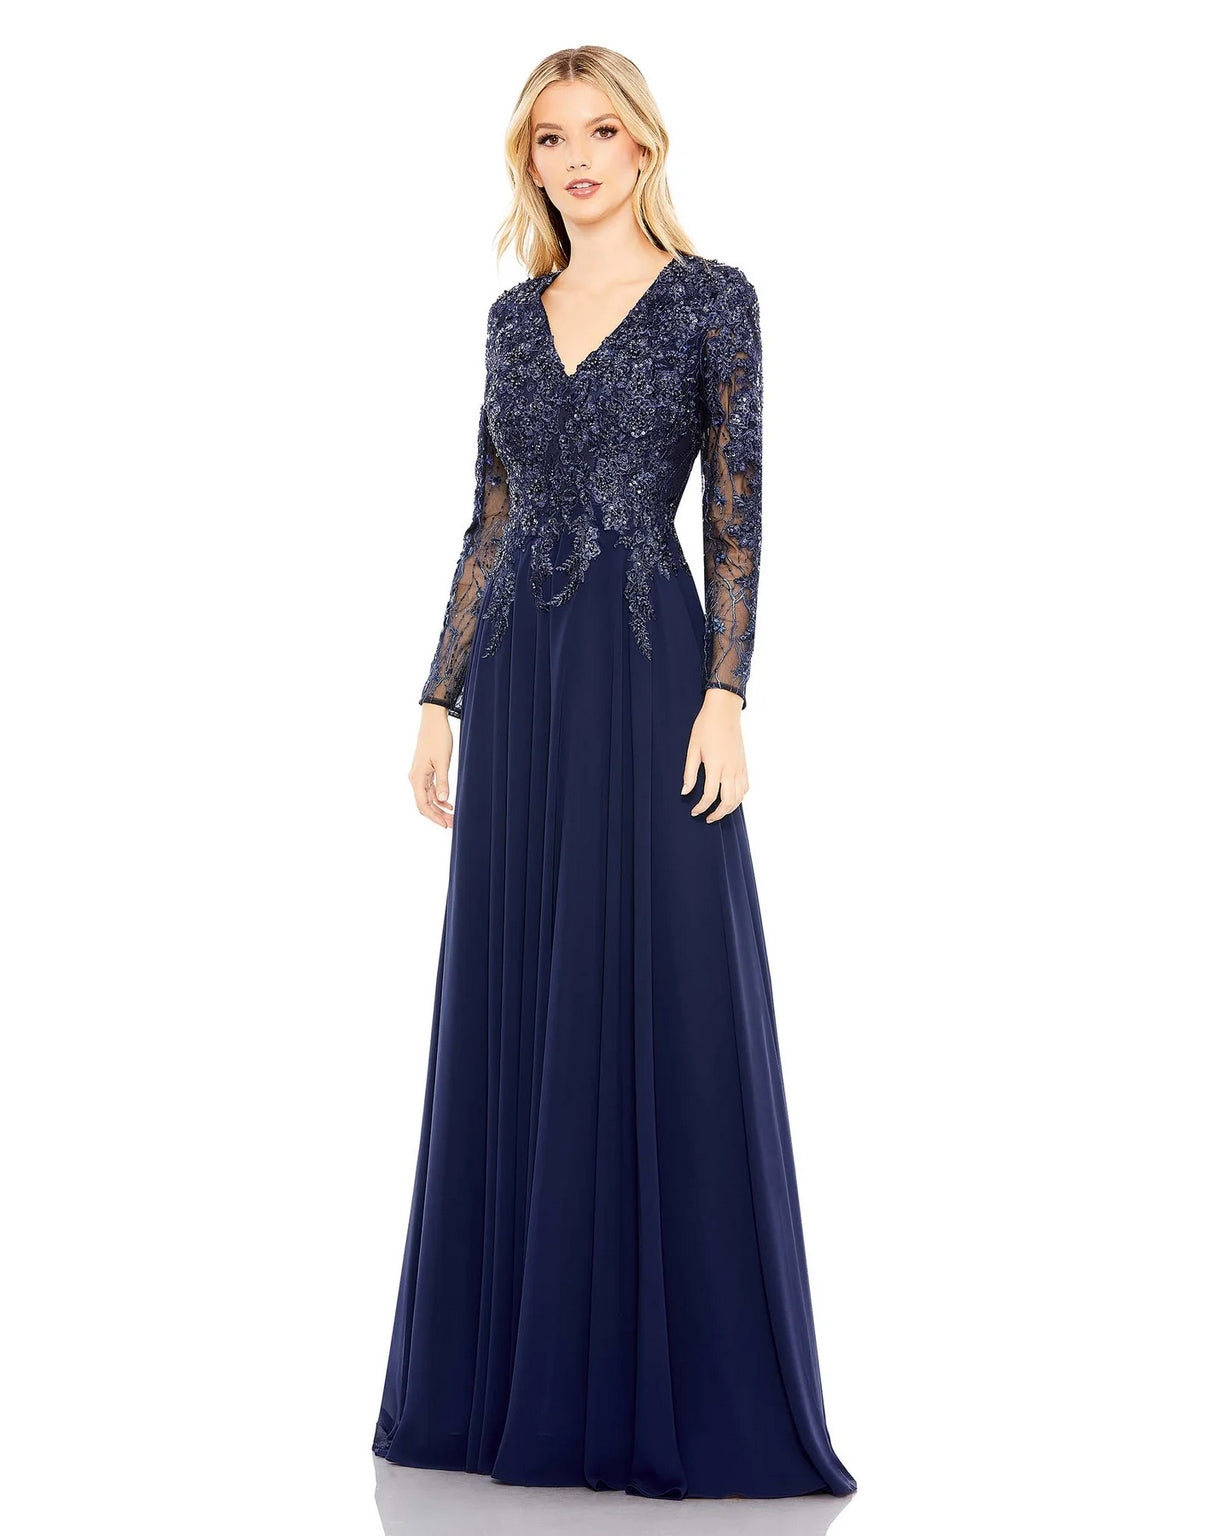 Navy Mac Duggal 20388 Formal Long Sleeve Evening Gown for $698.0 – The ...